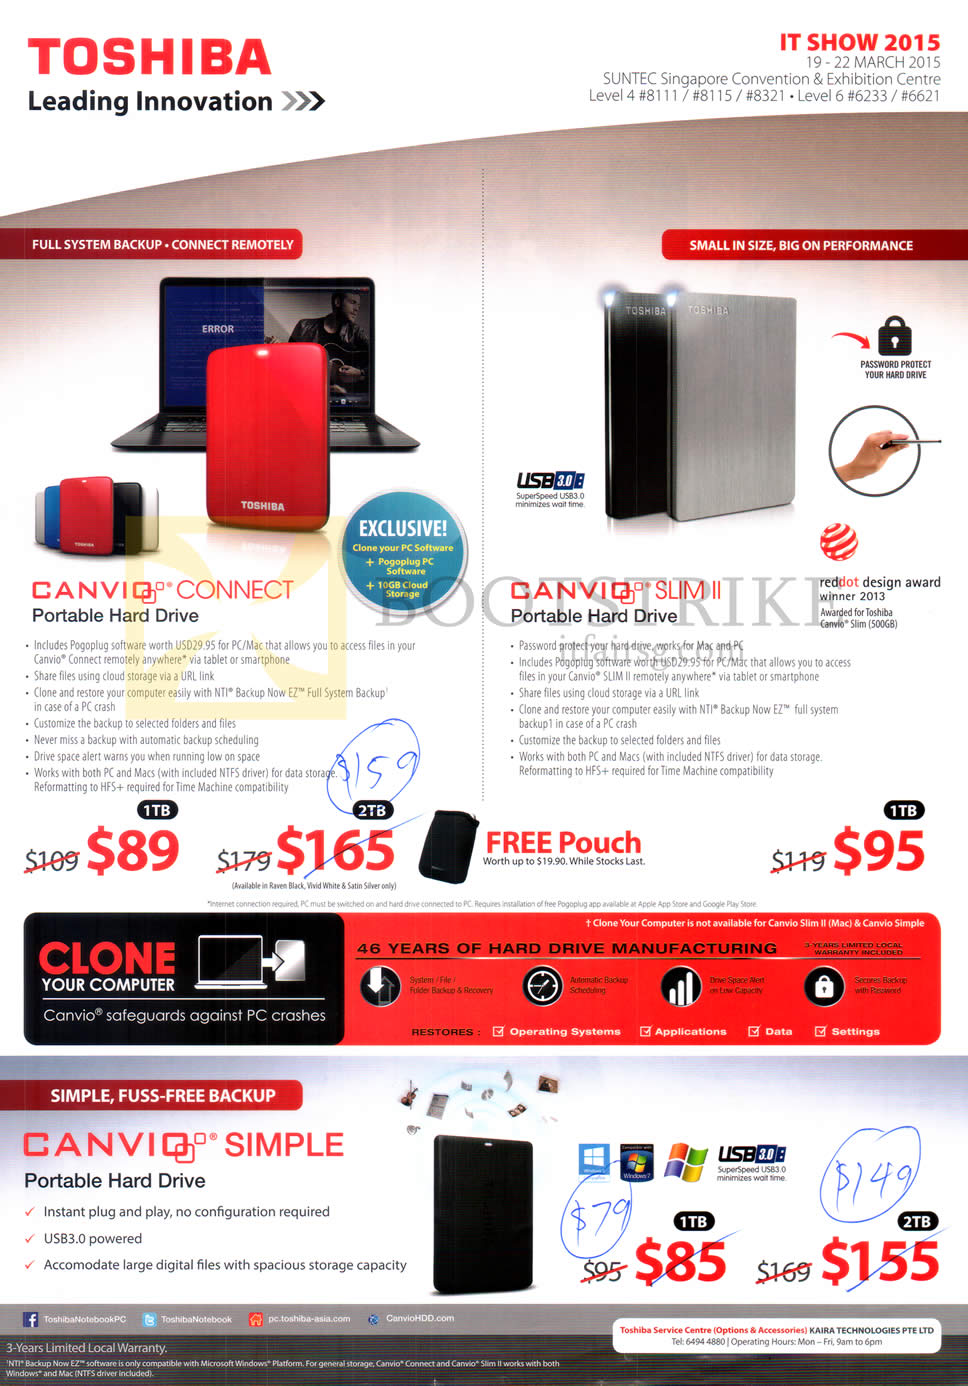 IT SHOW 2015 price list image brochure of Toshiba External Storage Drives Canvio Connect, Slim II, Simple, 1TB